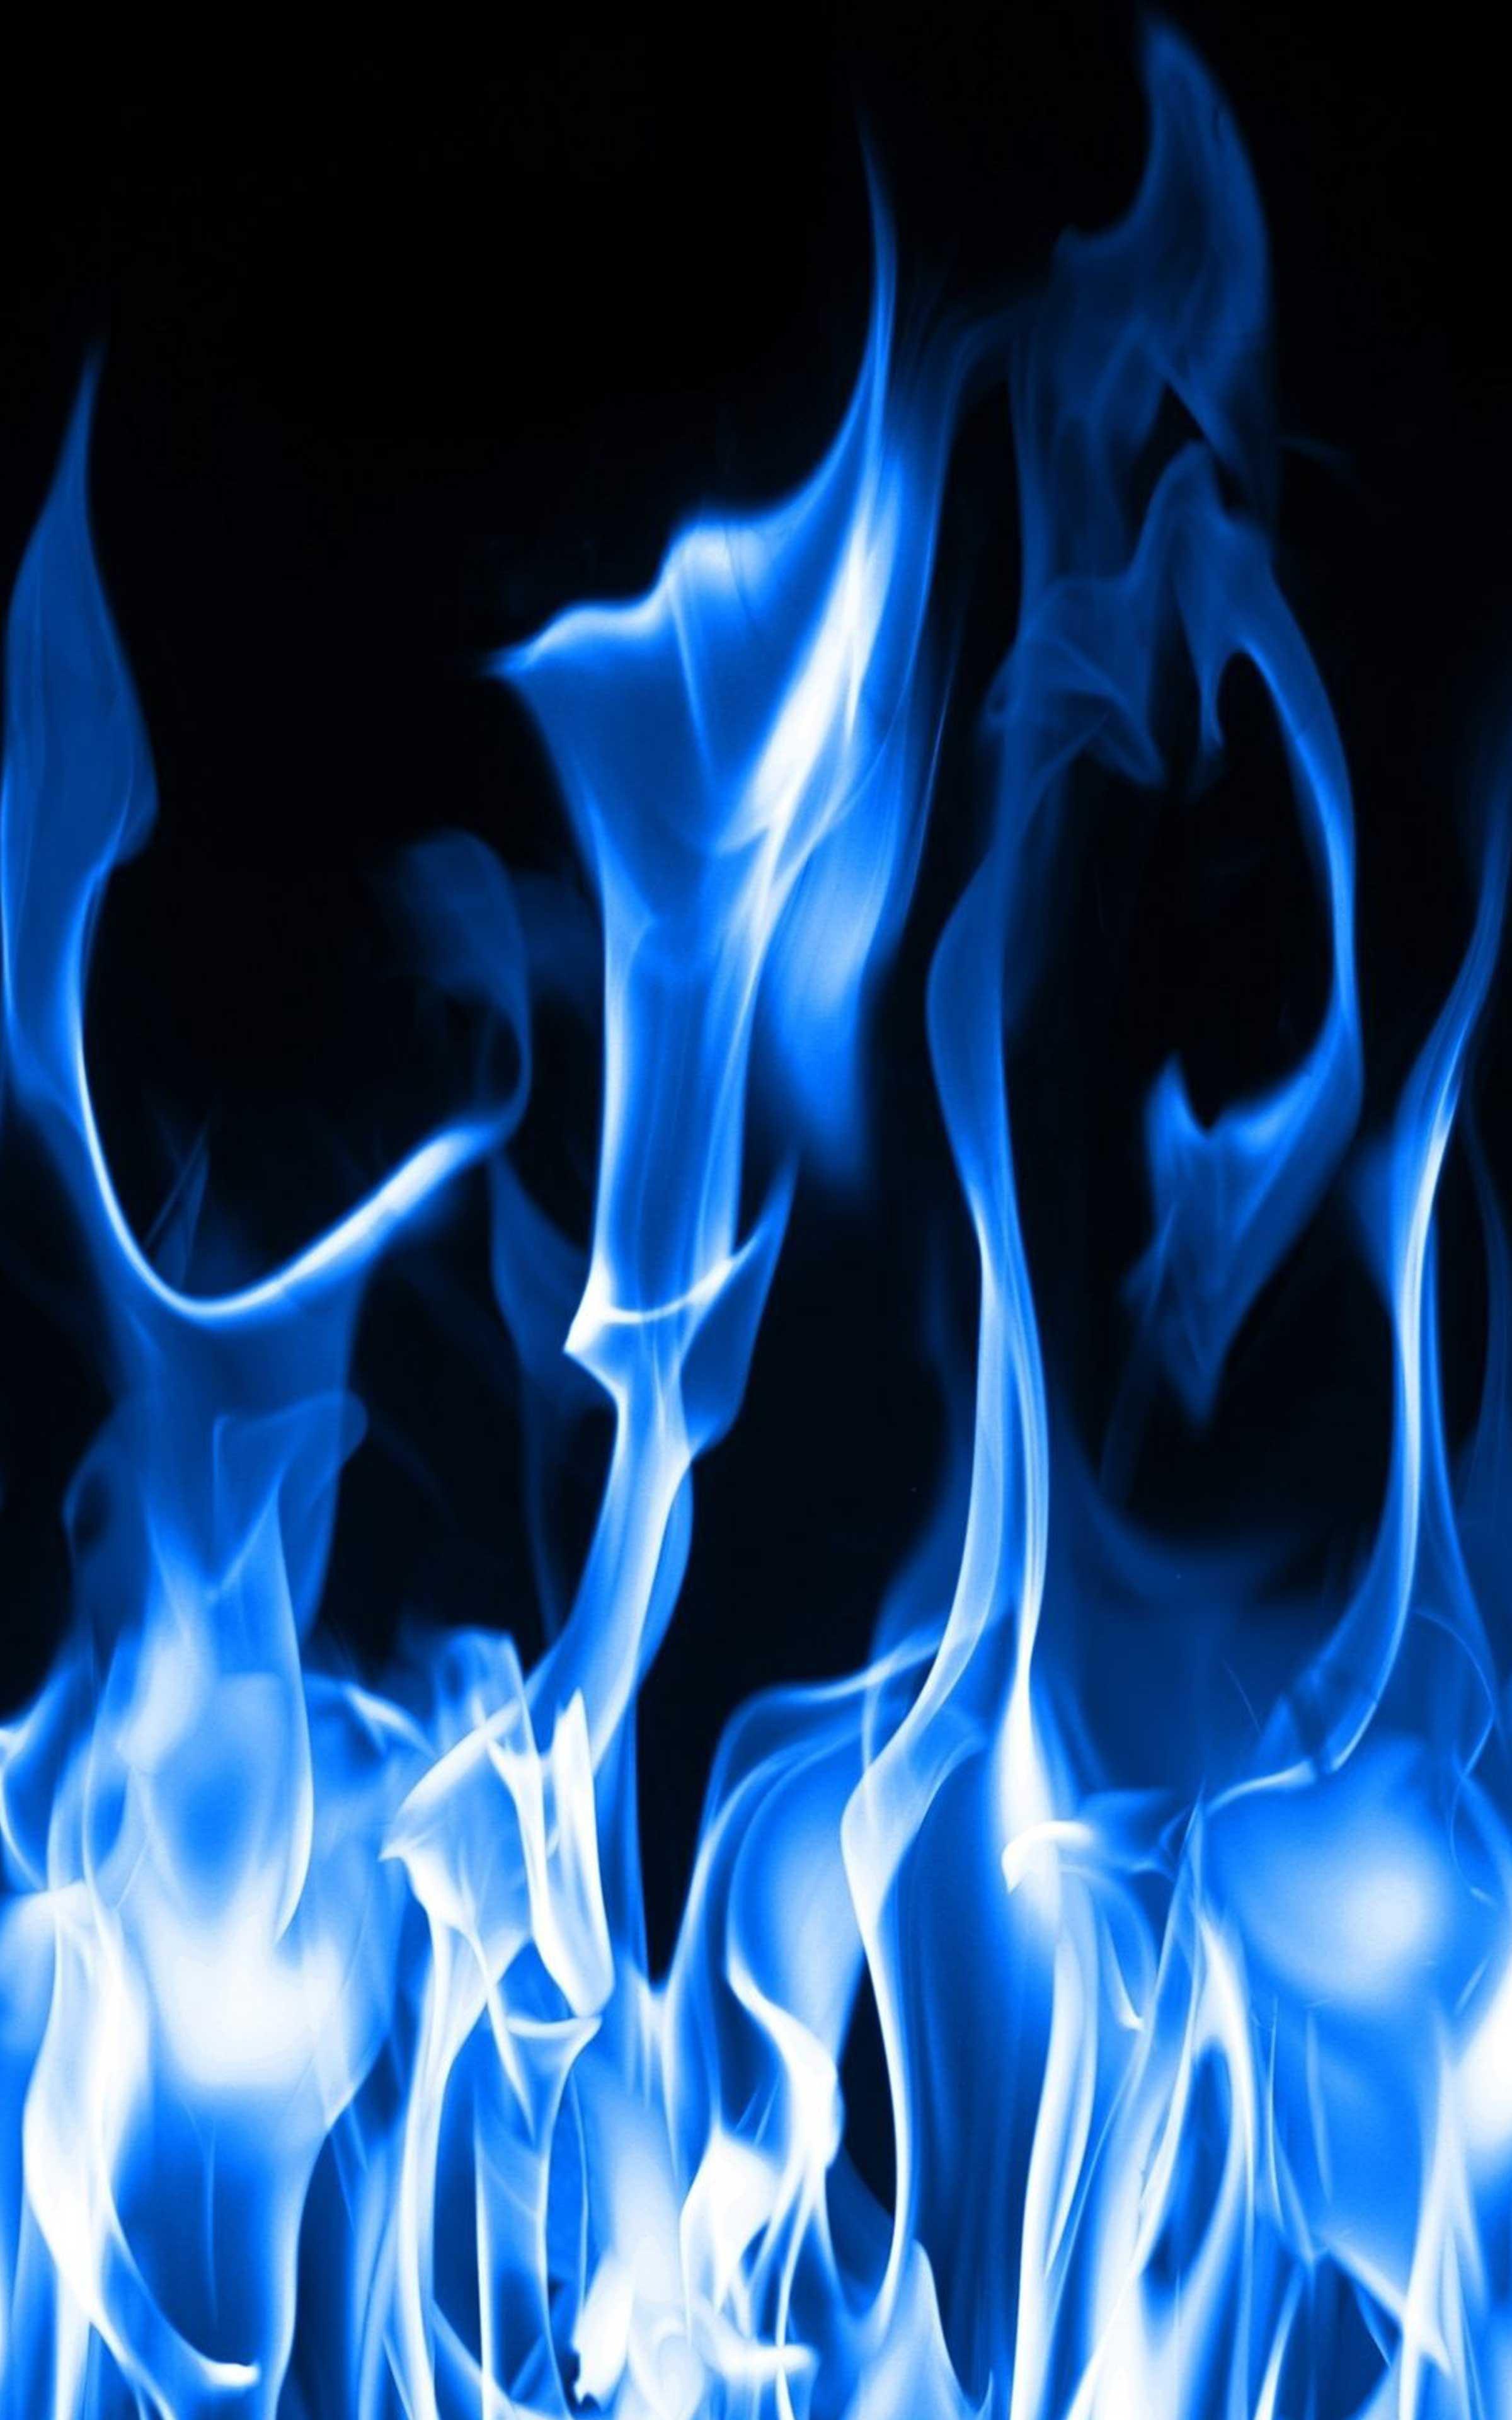 Blue fire on a black background - Flames